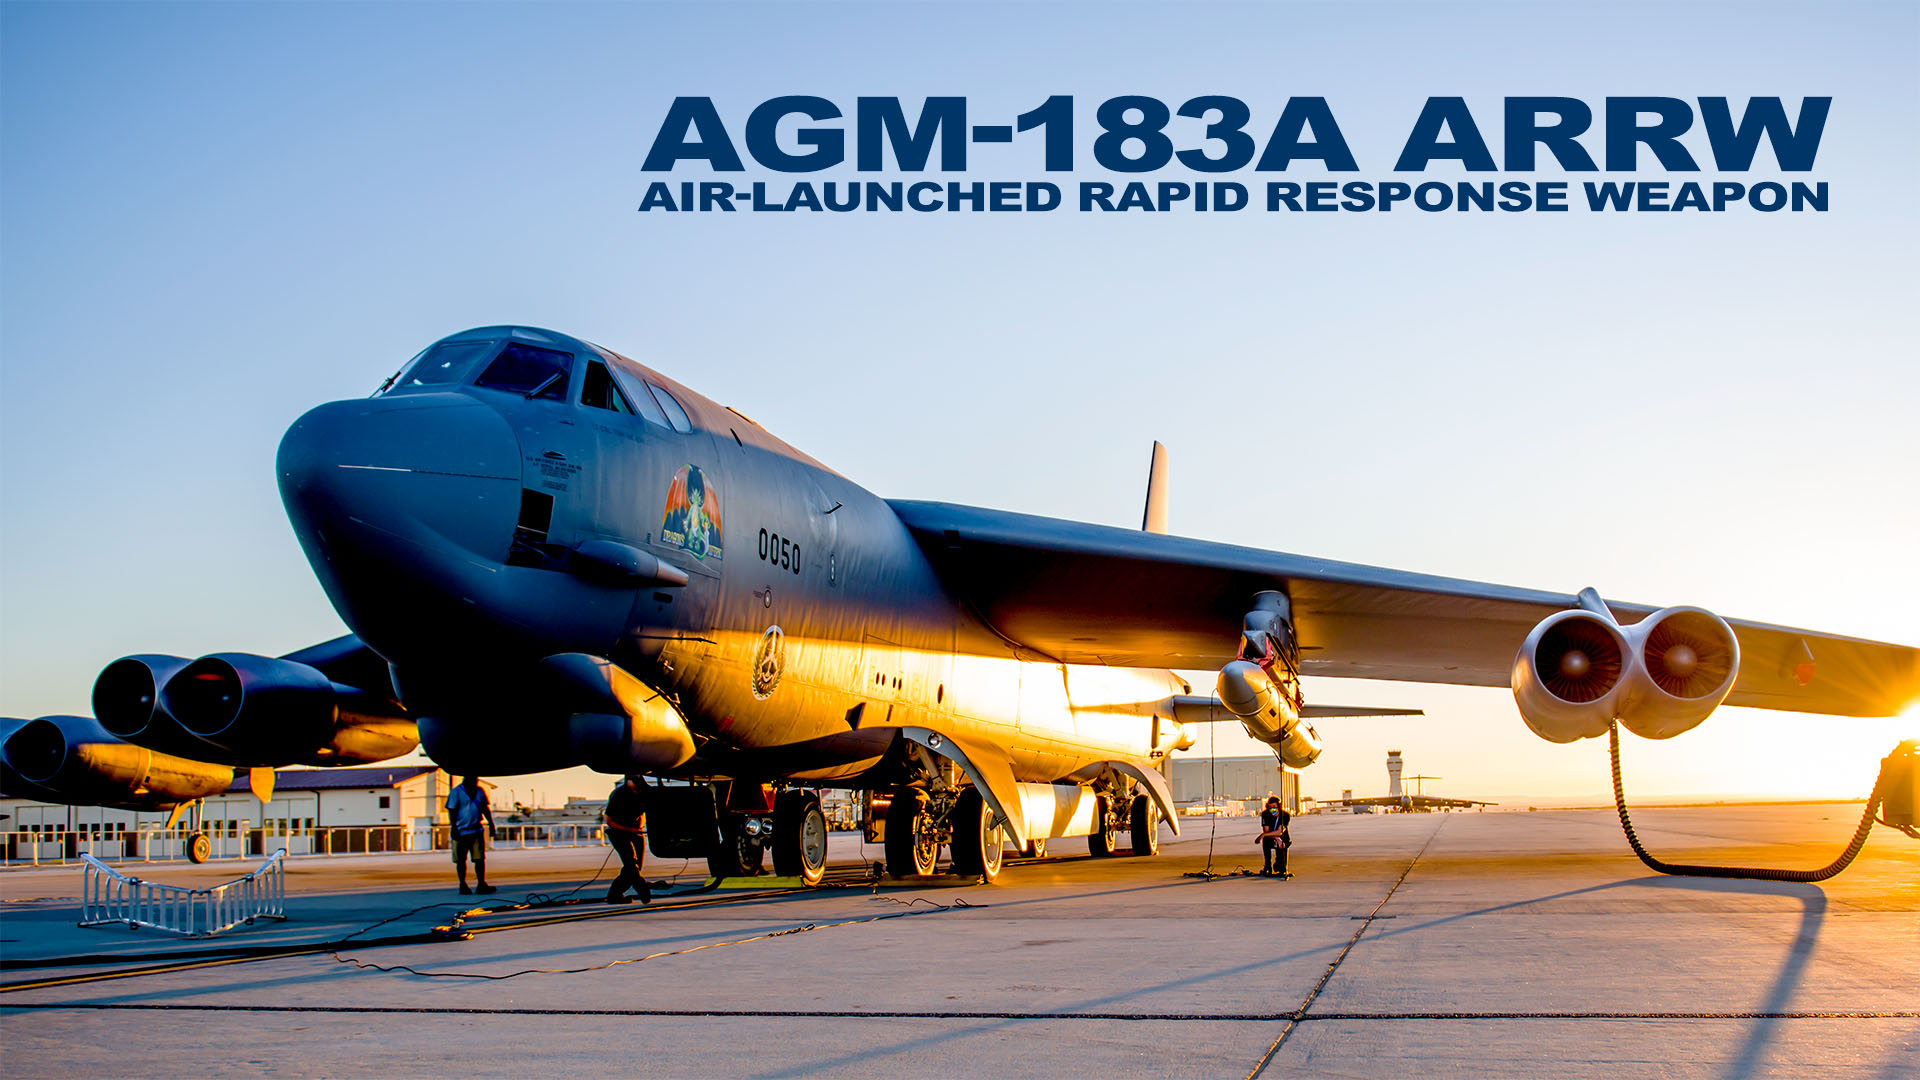 ARRW AGM-183A Air-launched Rapid Response Weapon Picture